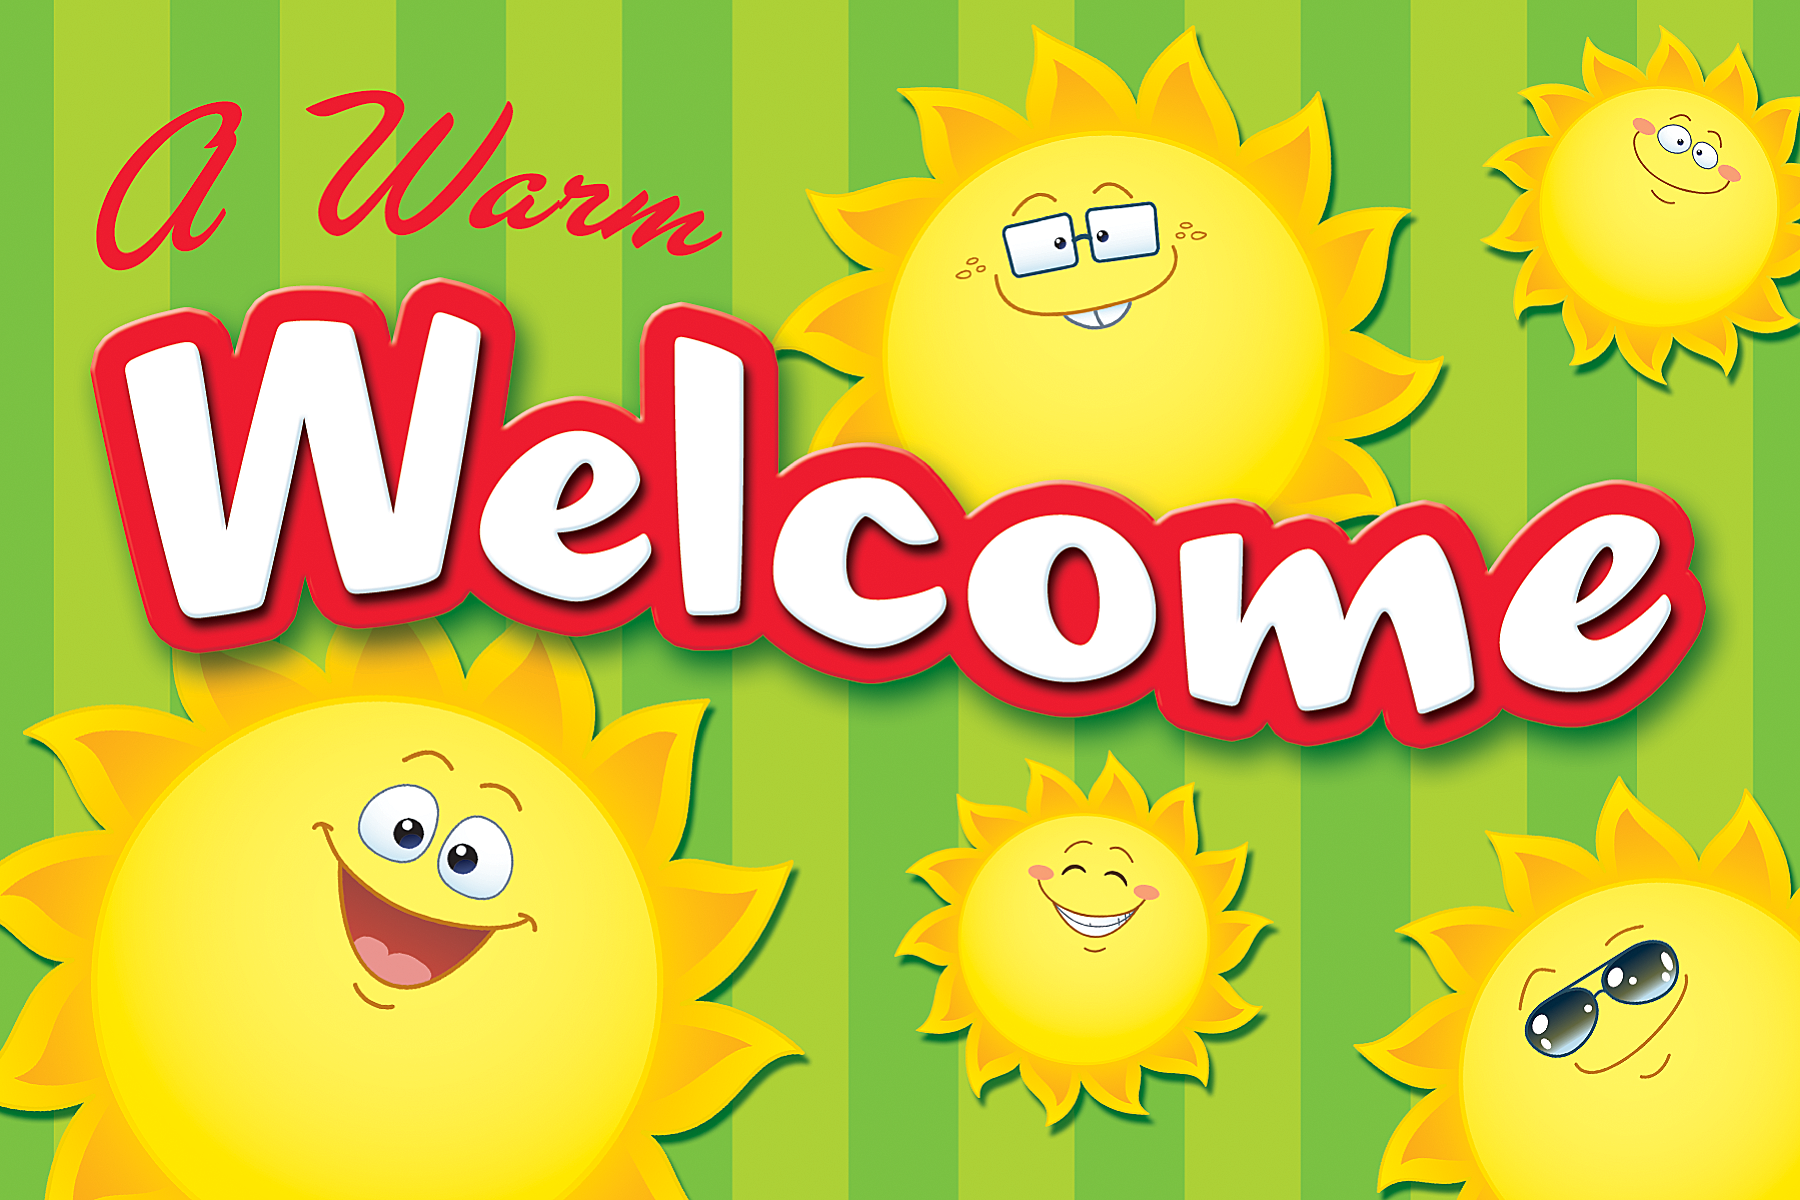 Welcome students. Welcome солнце. Солнце из welkom Teri. Welcome the Sunshine.